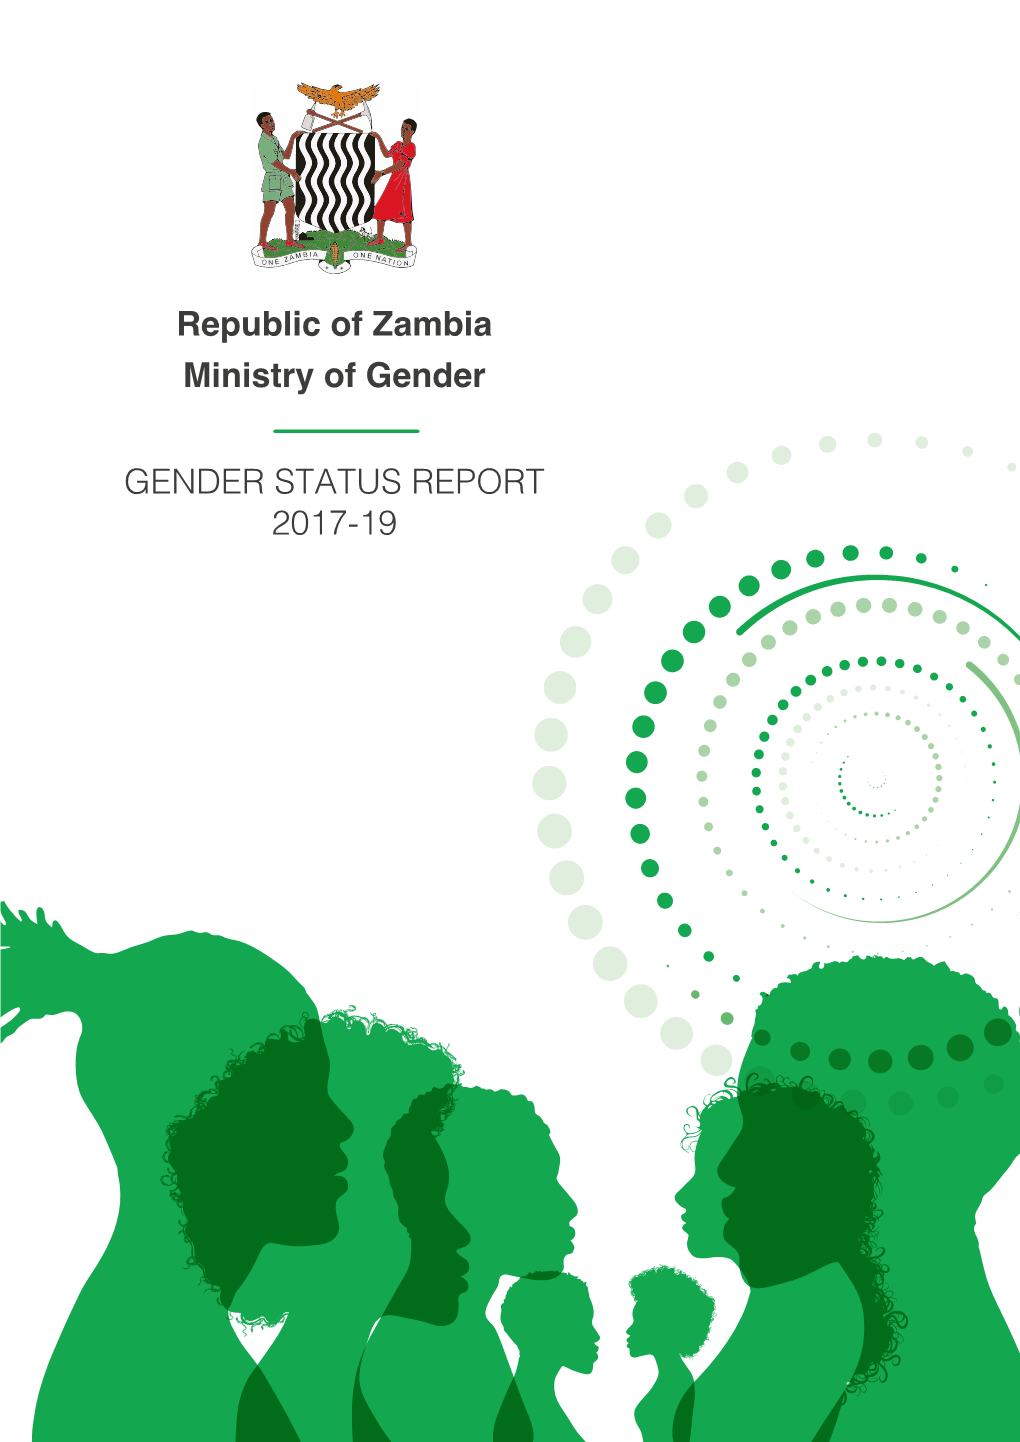 Republic of Zambia Ministry of Gender GENDER STATUS REPORT 2017